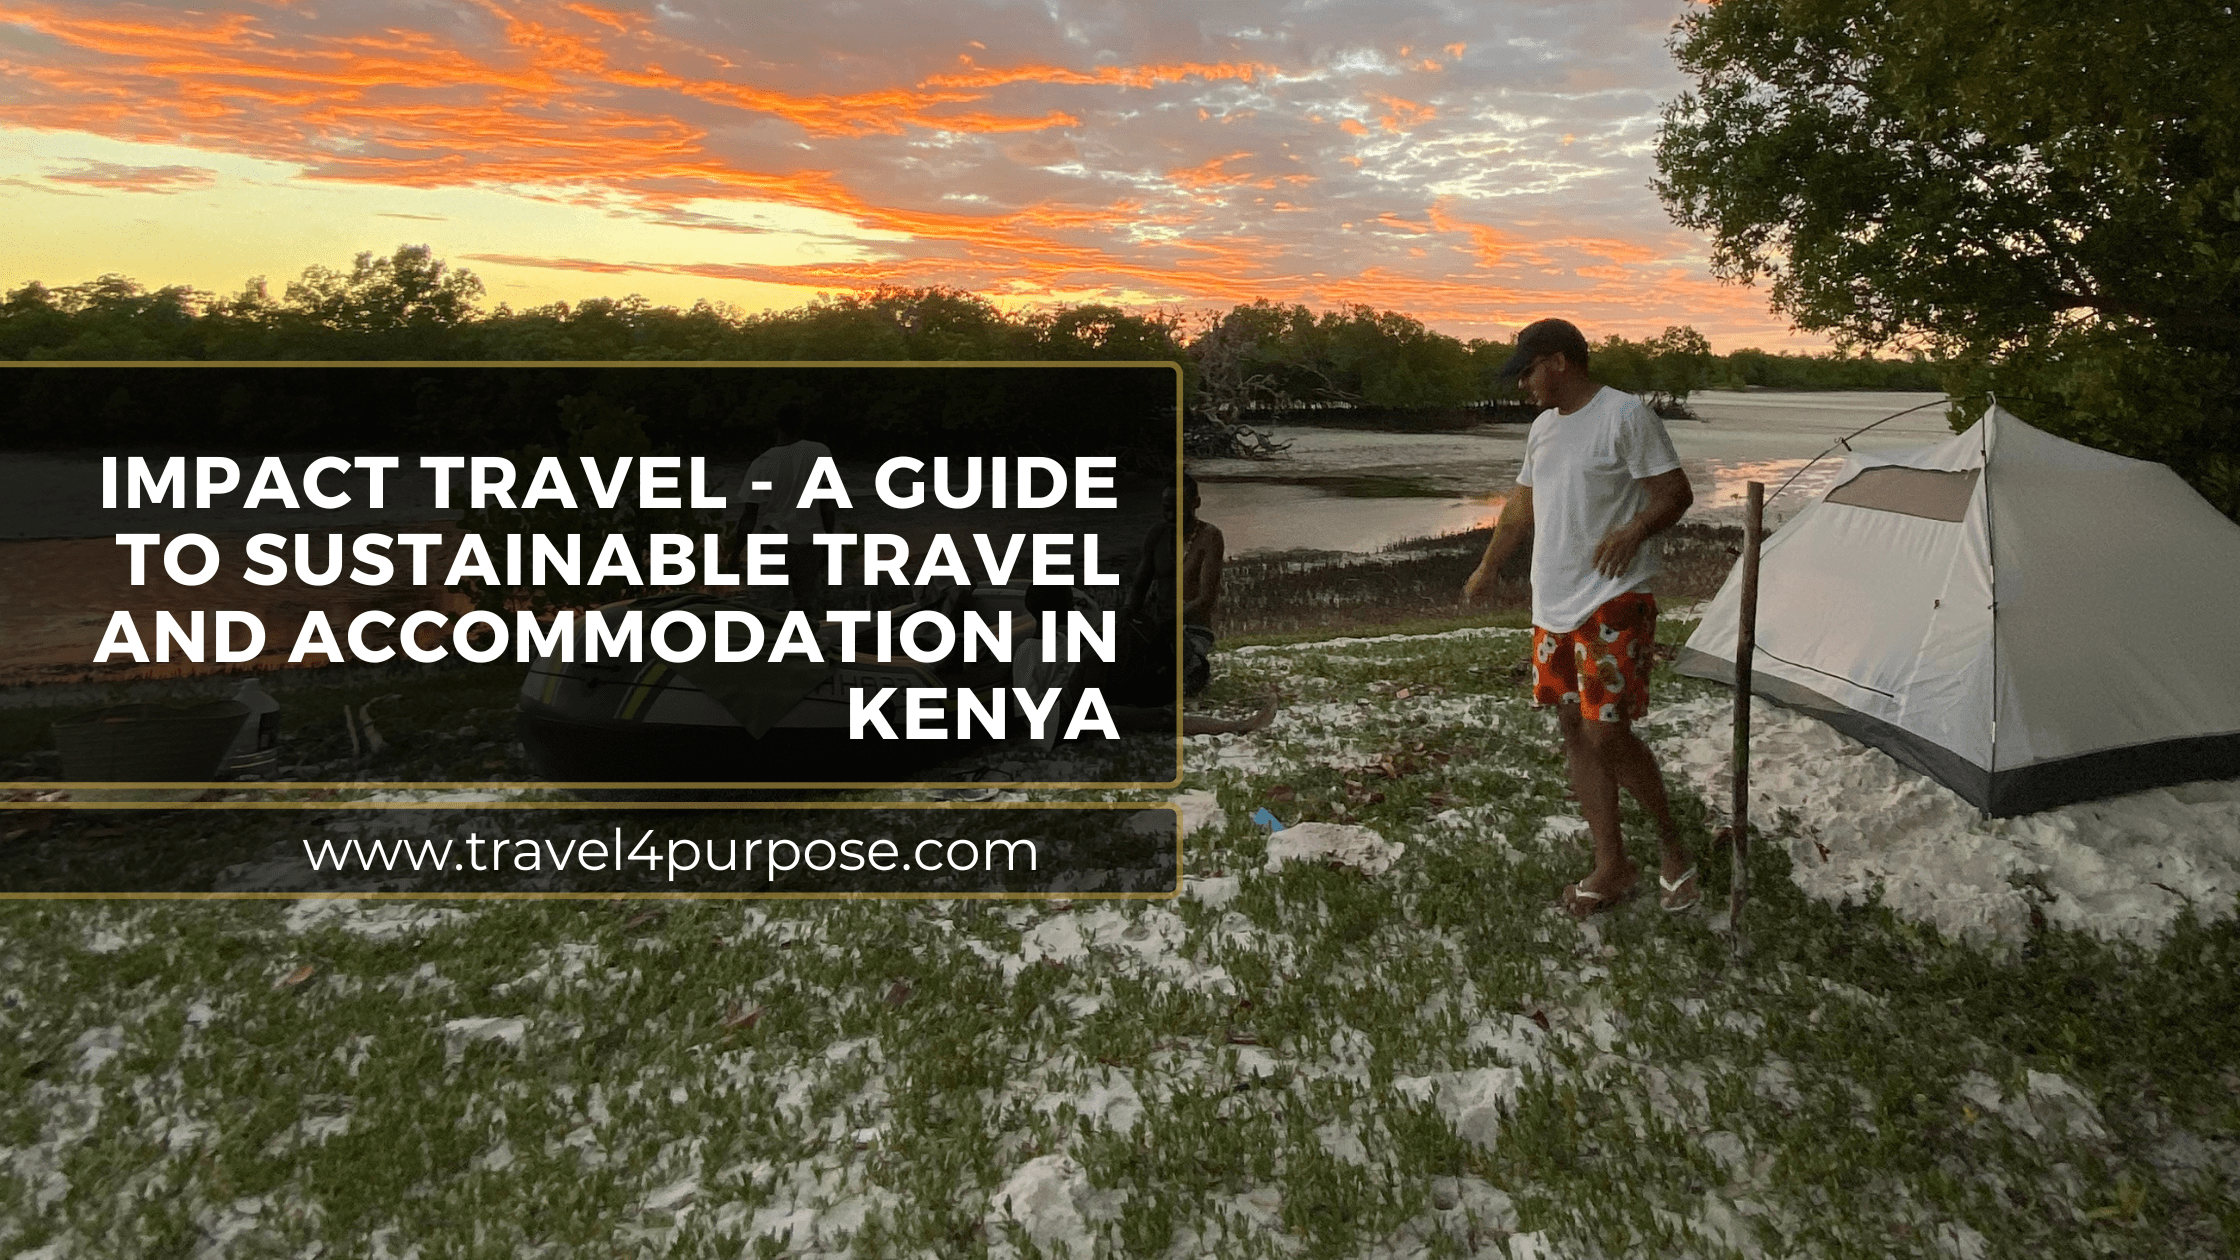 Impact Travel - A Guide to Sustainable Travel and Accommodation in Kenya